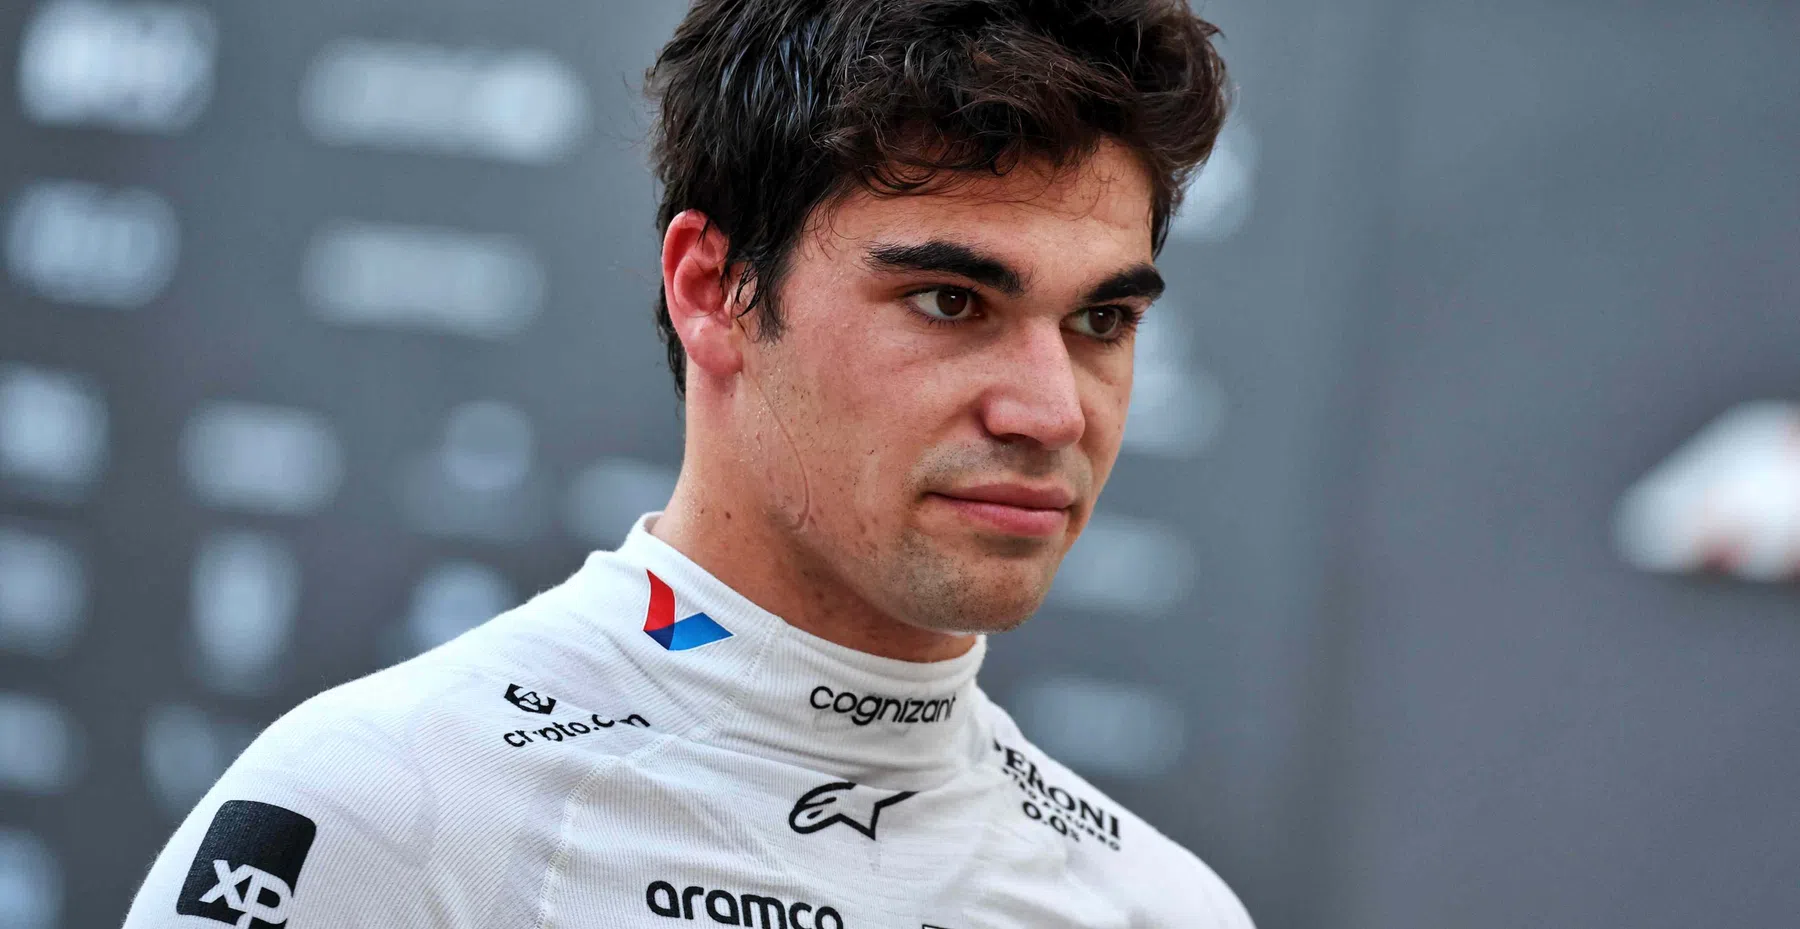 Stroll is not going to change behaviour